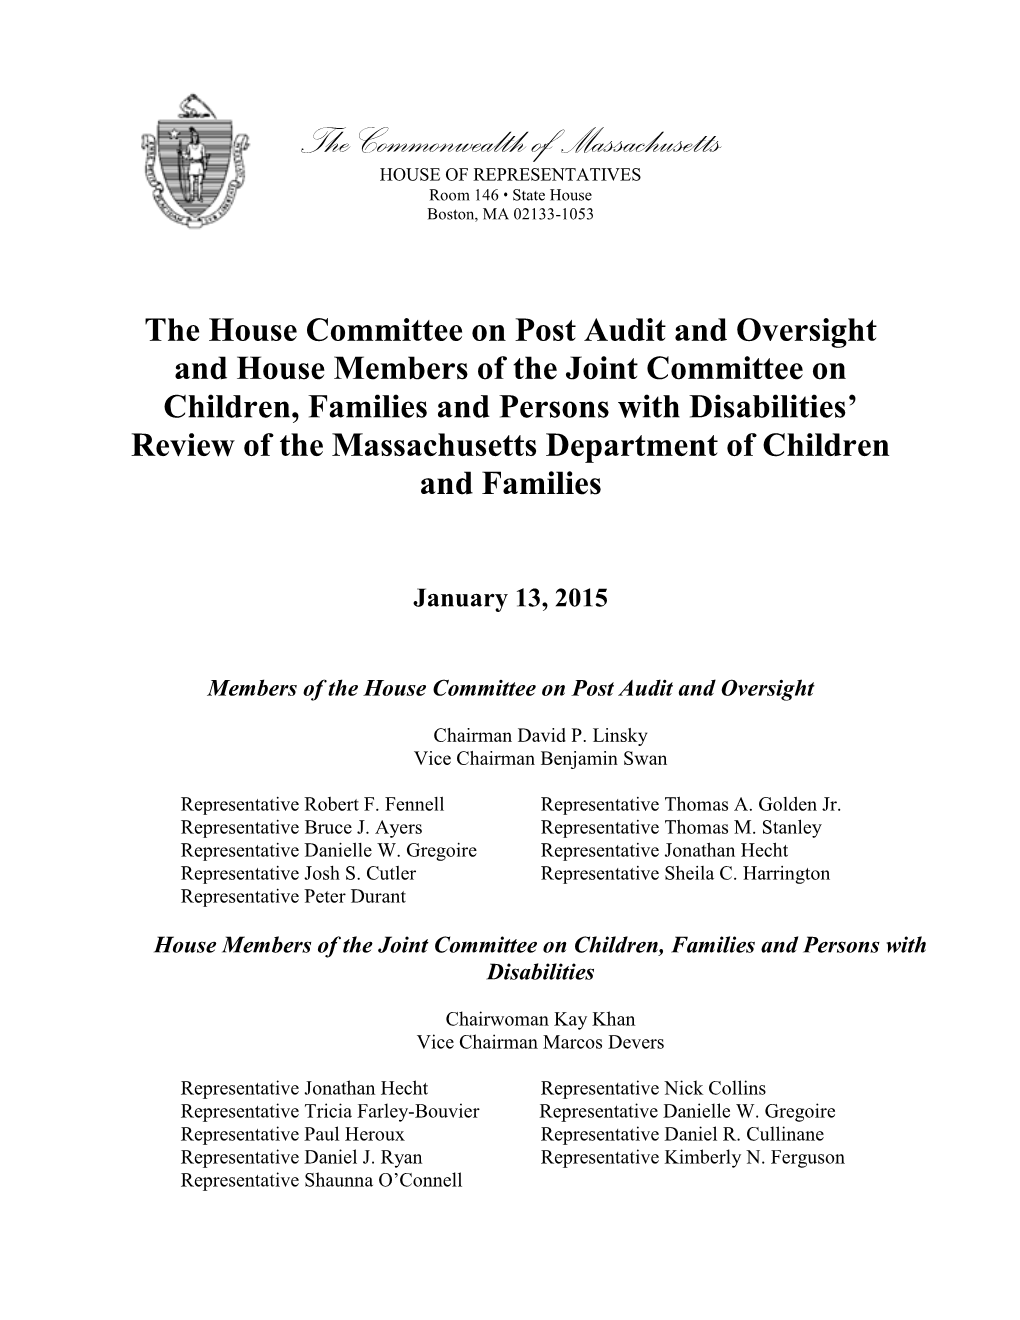 House Committees' Review of the Massachusetts Department of Children and Families 1